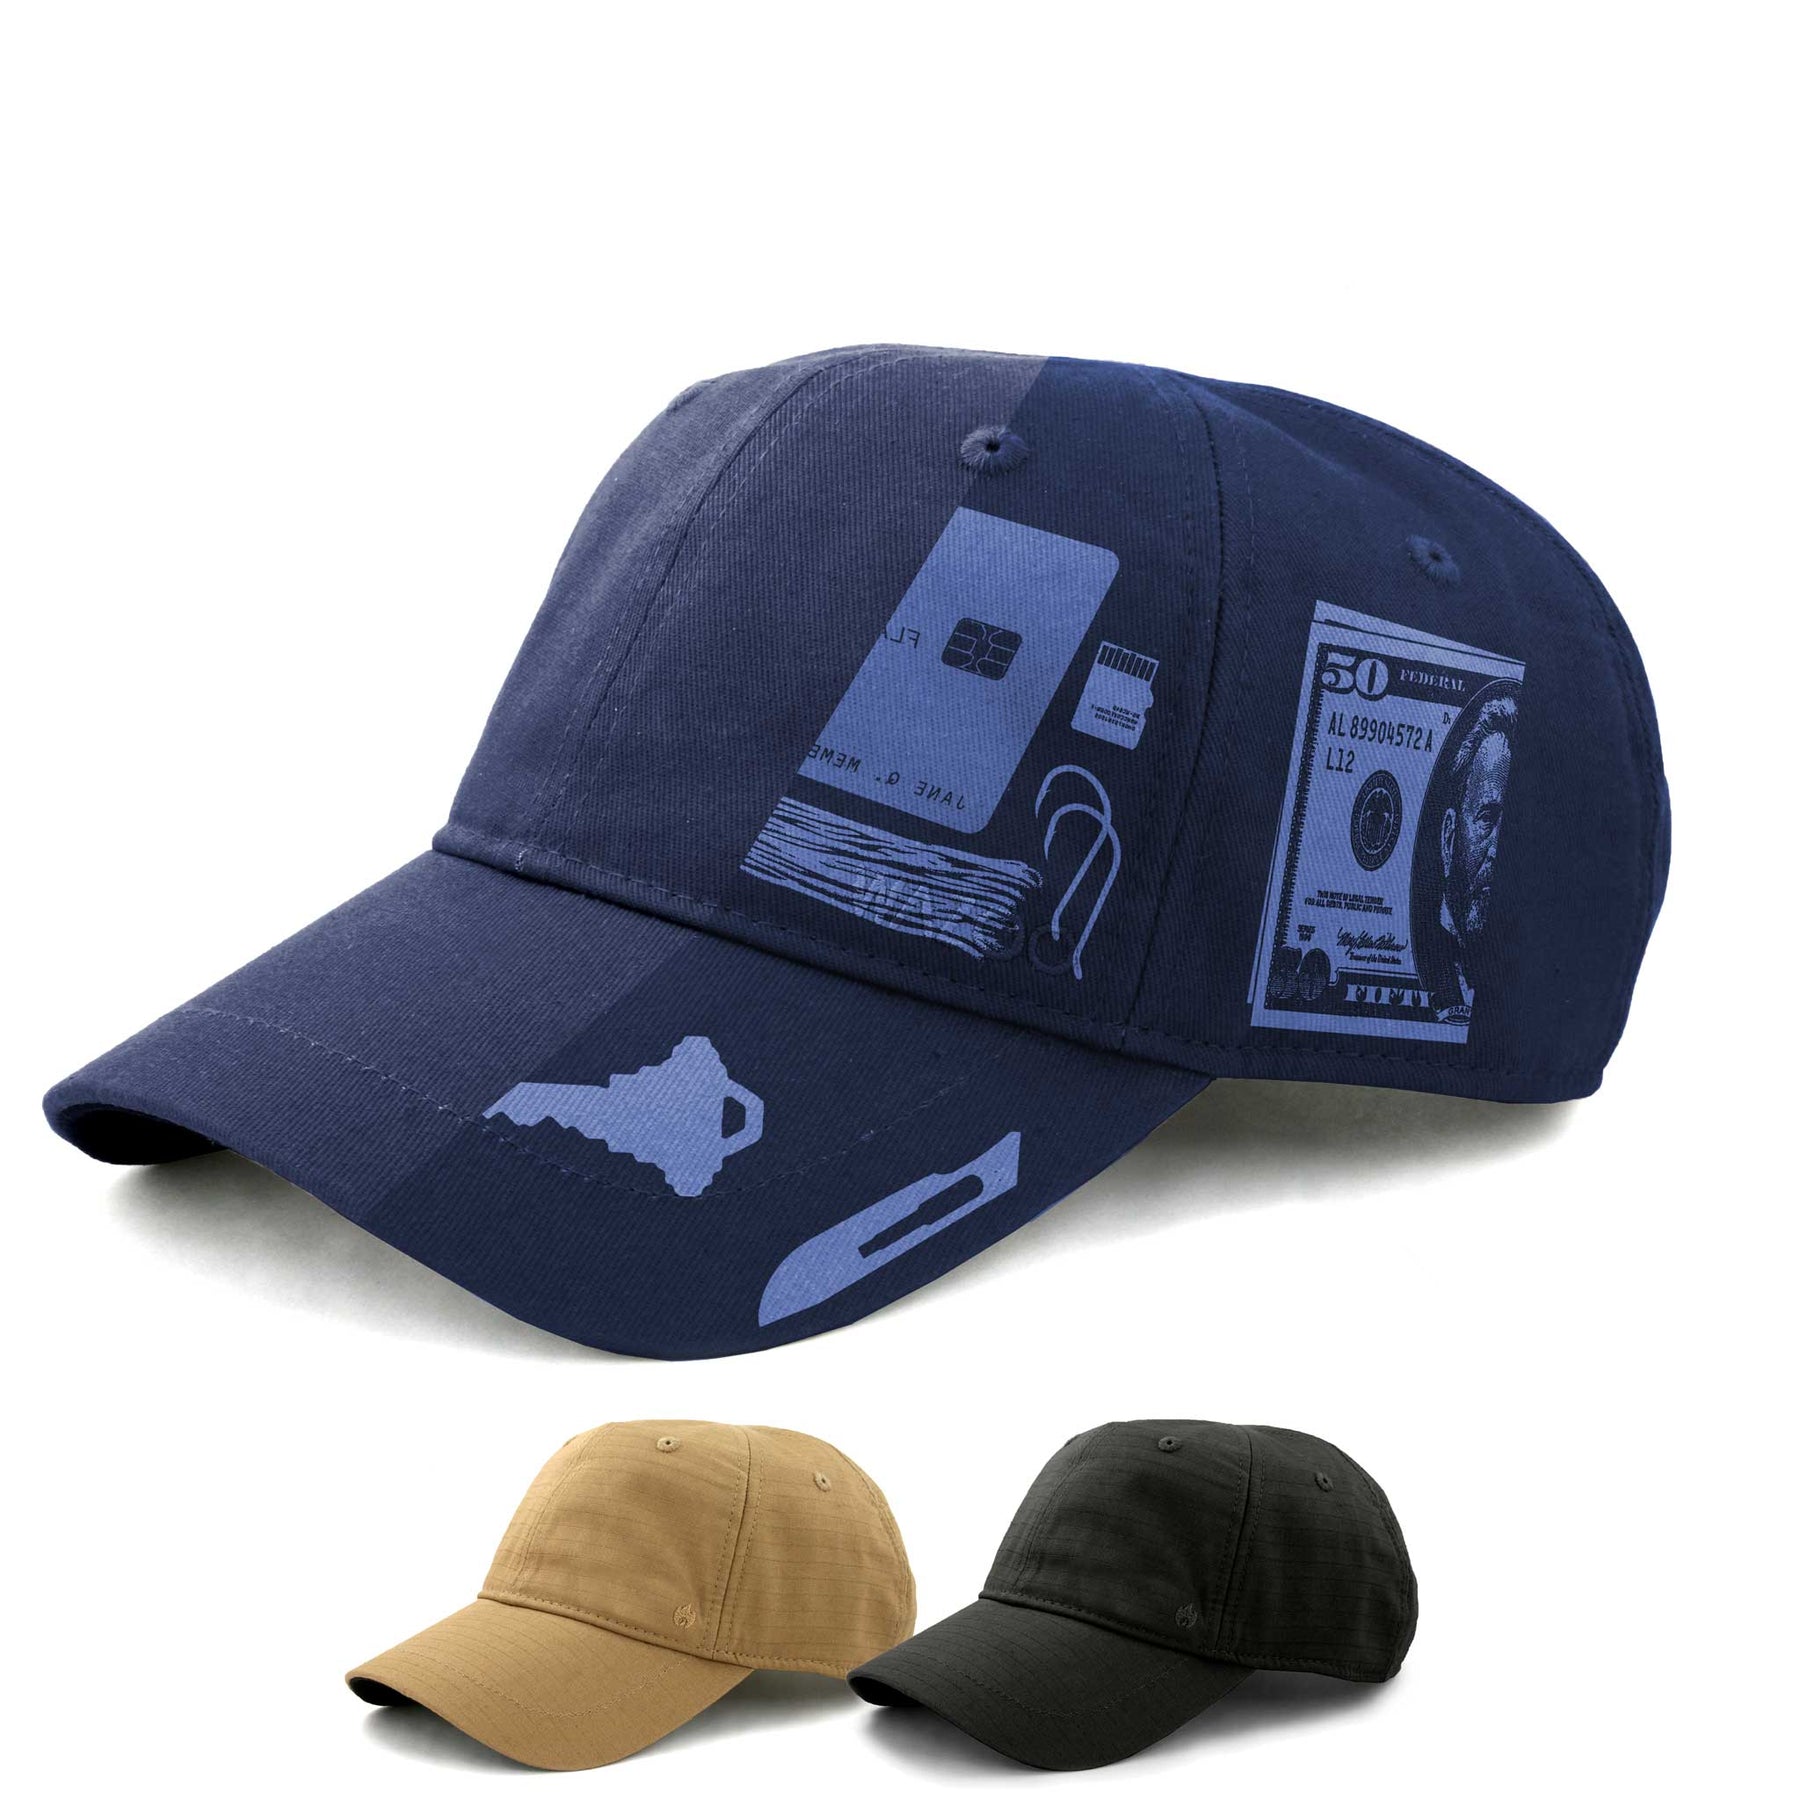 Folding Cap with 4 Secret Pockets for Cash and Keys at